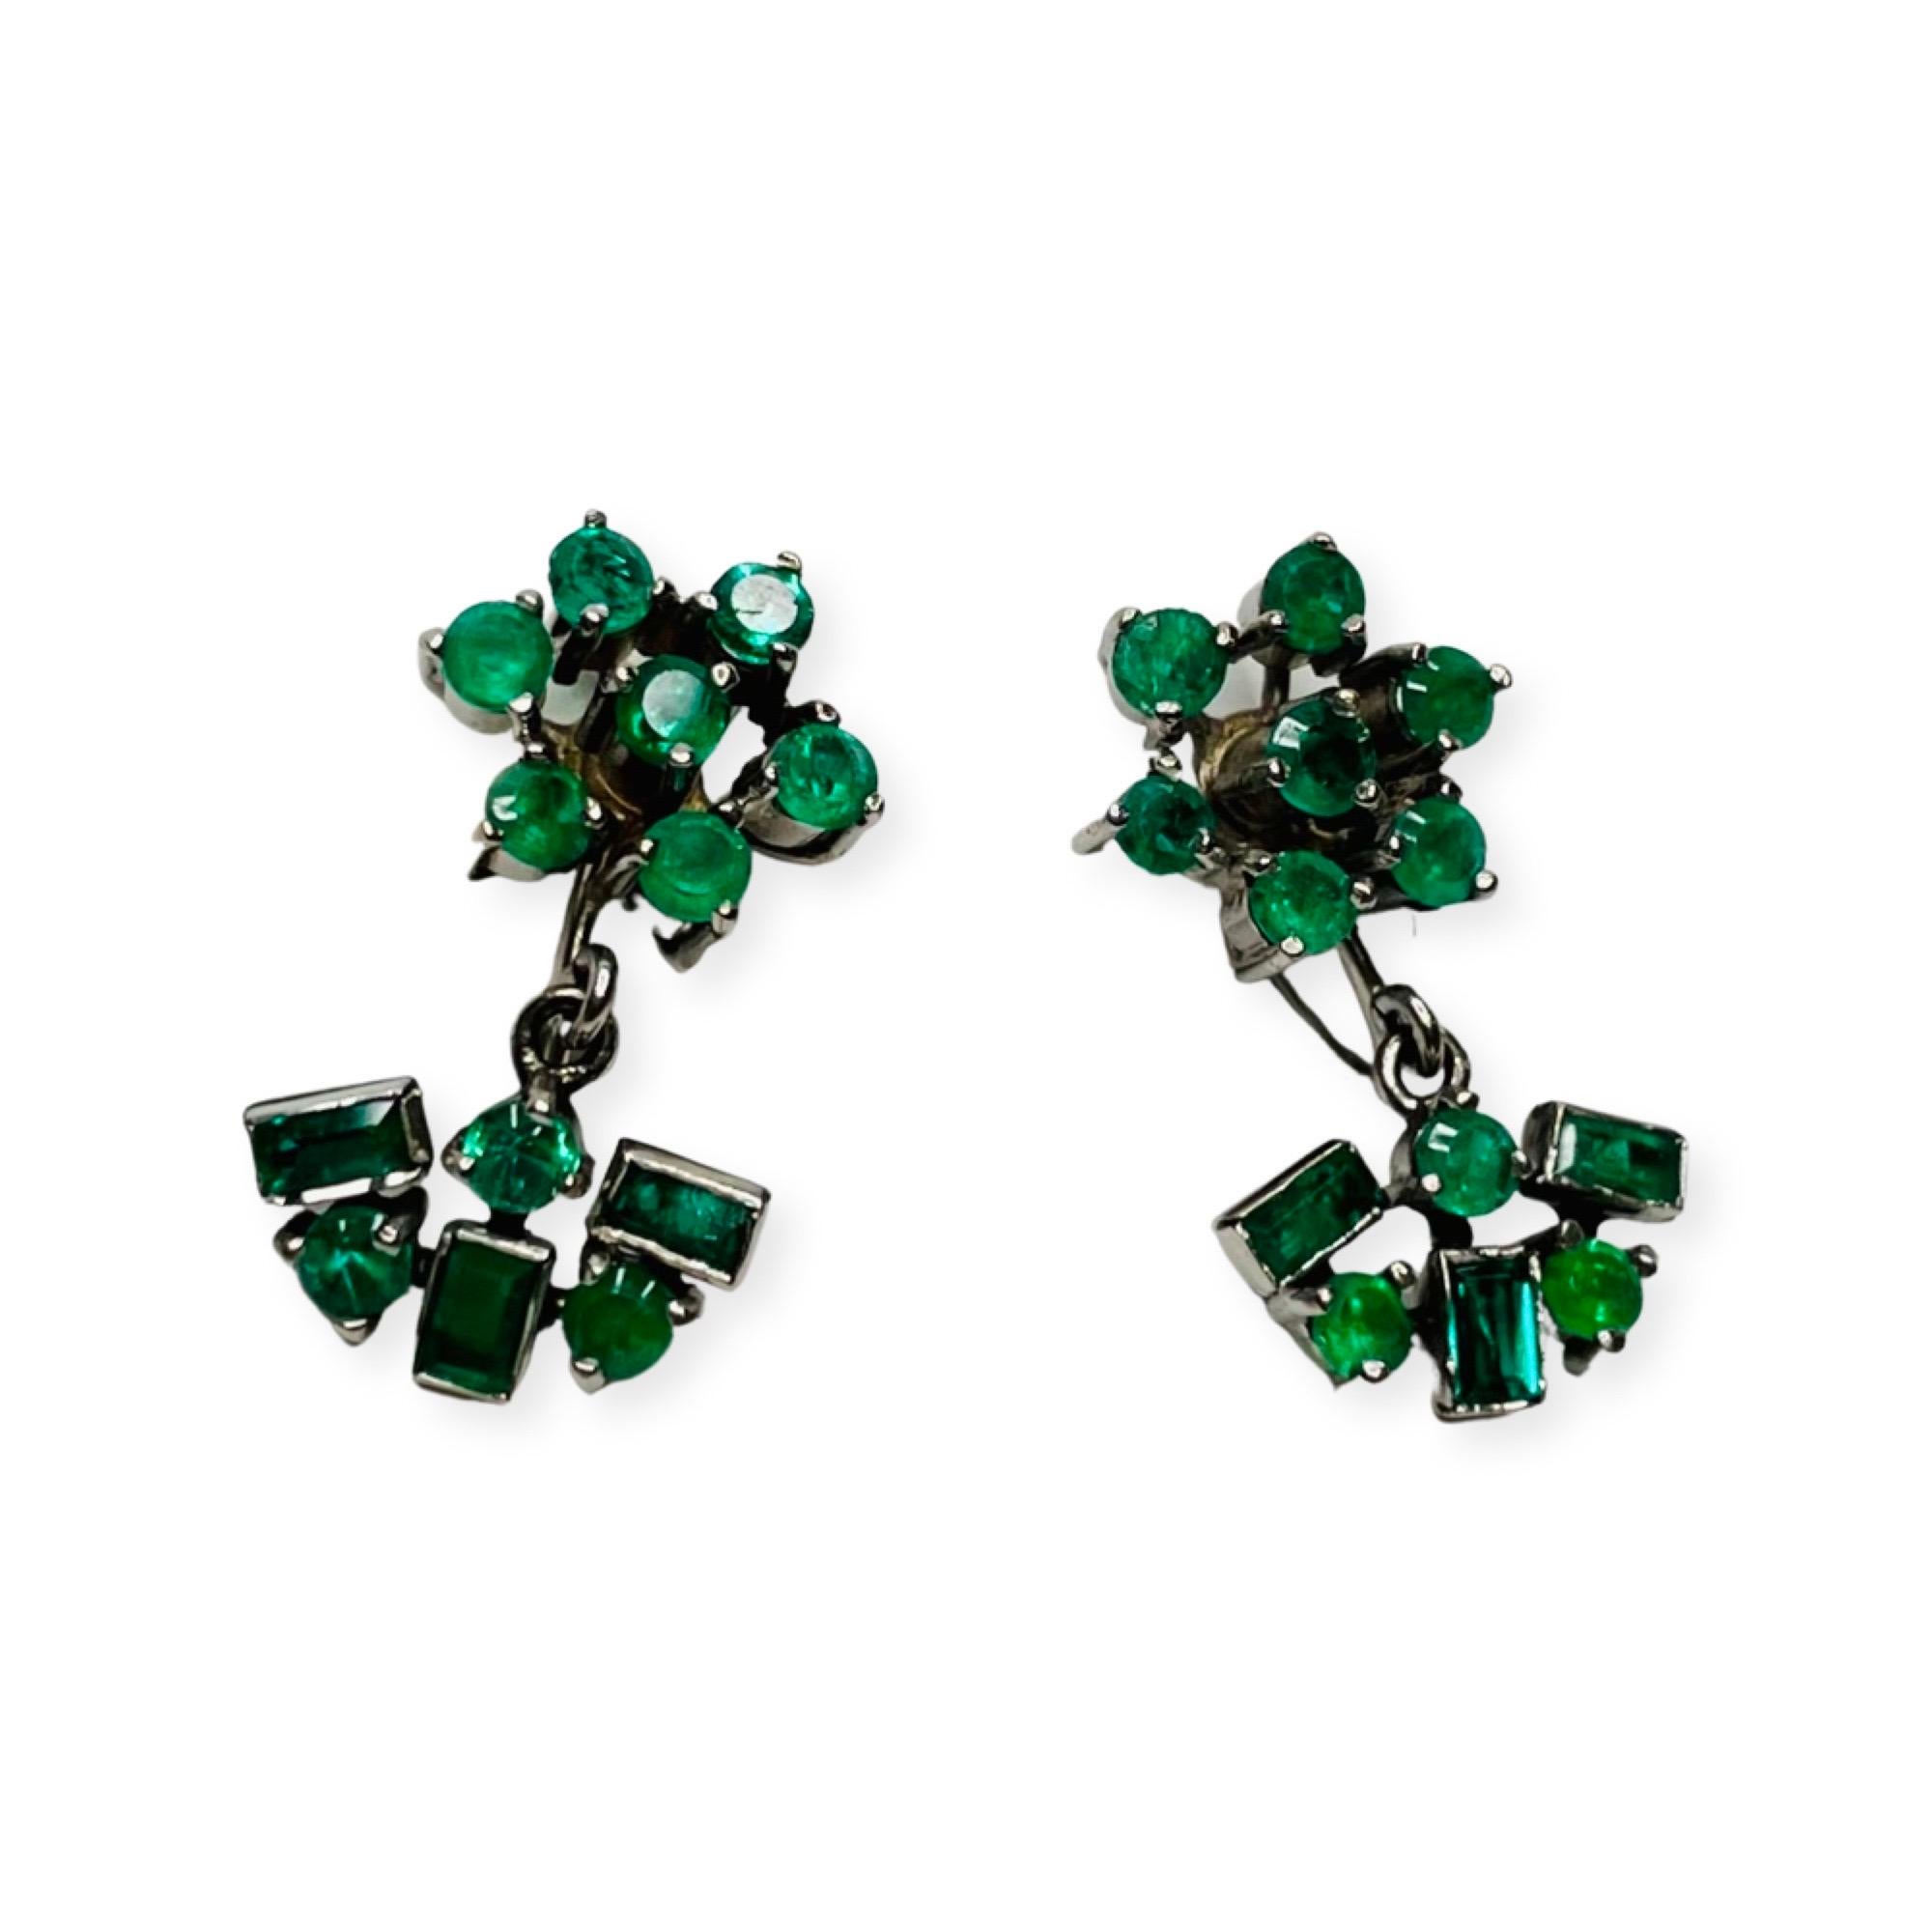 Lithos 14K White Gold Natural Emerald Earrings for Non Pierced Ears. There are 20 round cut emeralds, prong set, for a total weight of 1.80 carats and 6 baguette emeralds, bezel set, for a total weight of 0.48 carats. The total emerald weight is